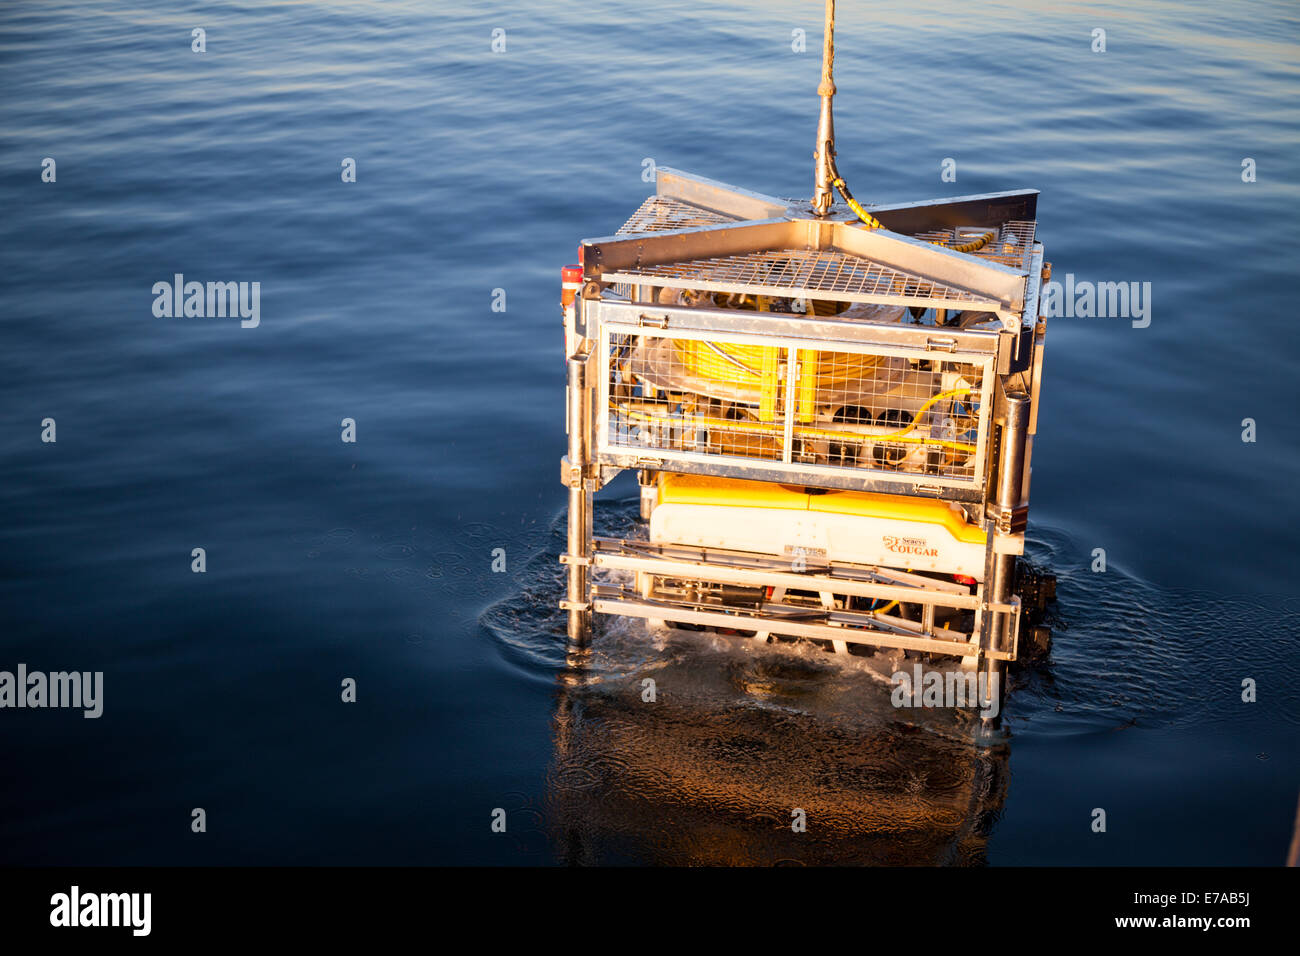 A Remotely Operated Vehicle (ROV) working offshore Stock Photo